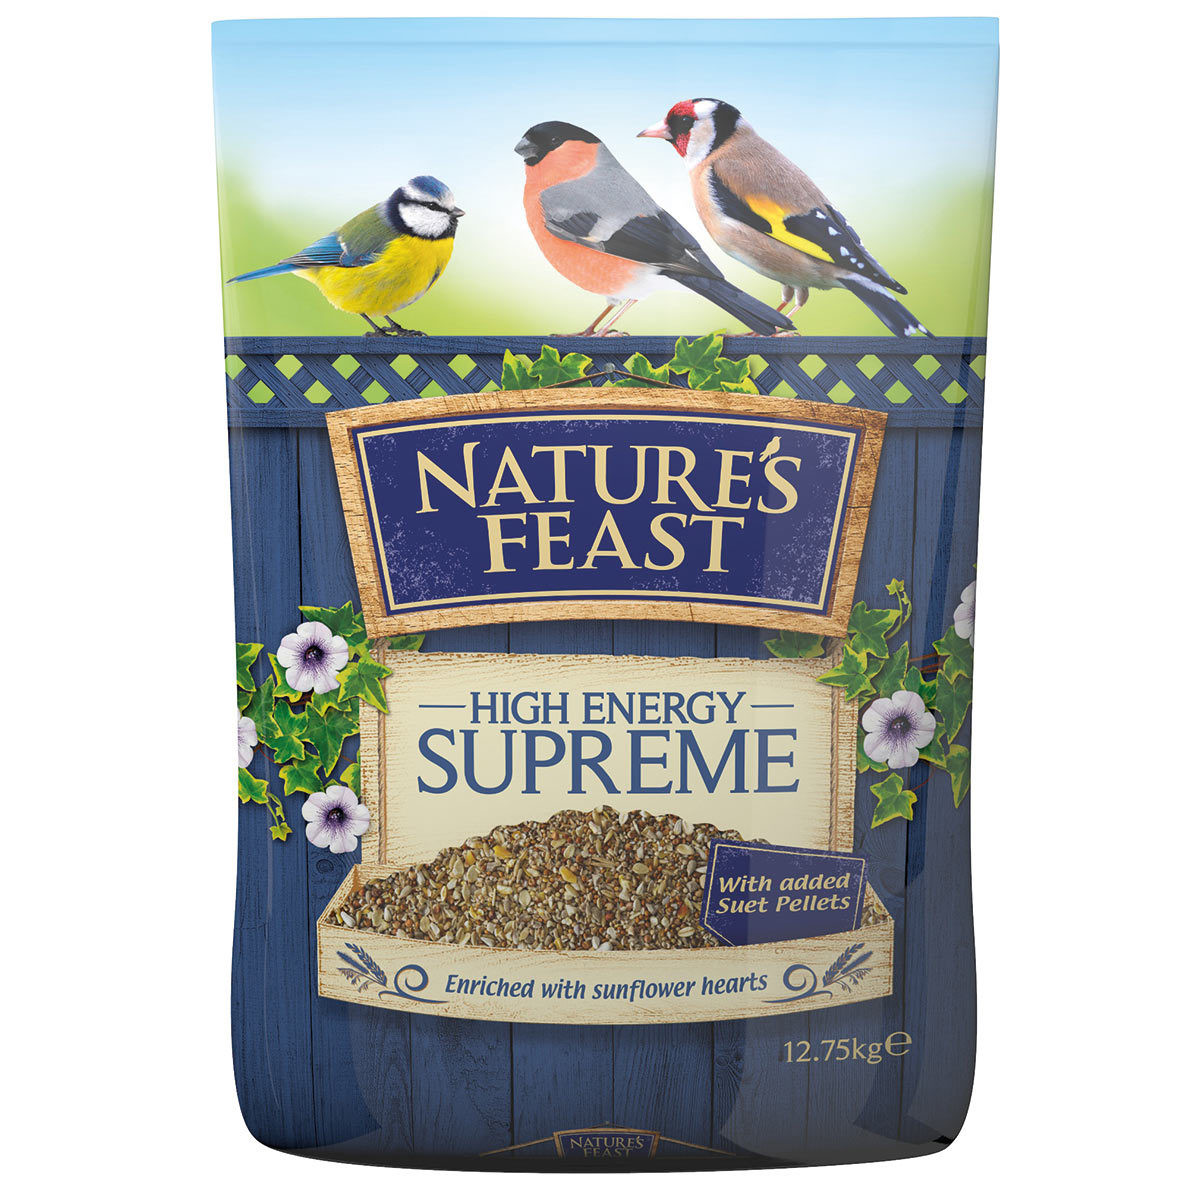 Nature's Feast High Energy Supreme Seed Blend, 12.75kg